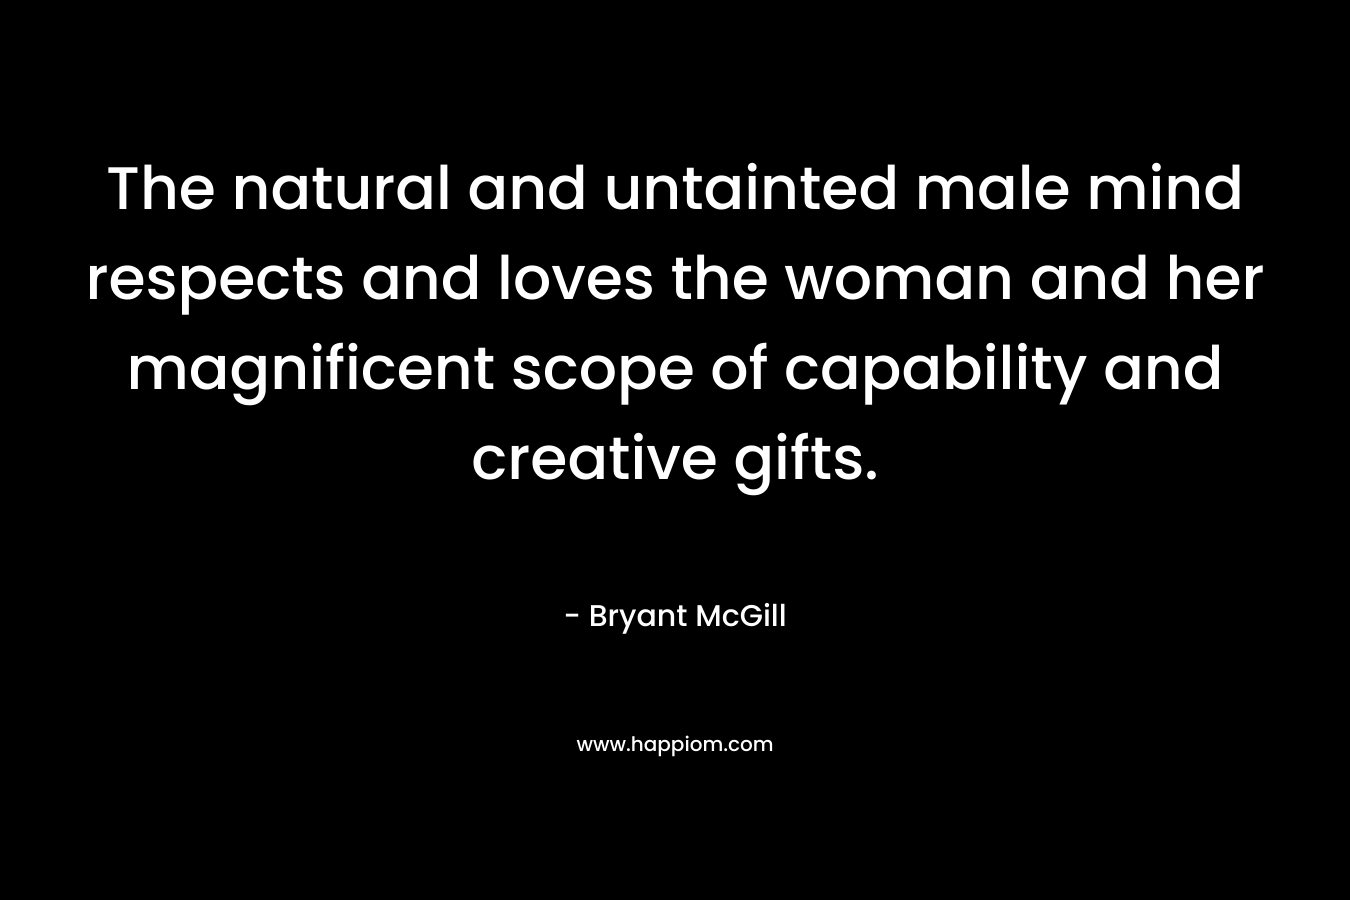 The natural and untainted male mind respects and loves the woman and her magnificent scope of capability and creative gifts.